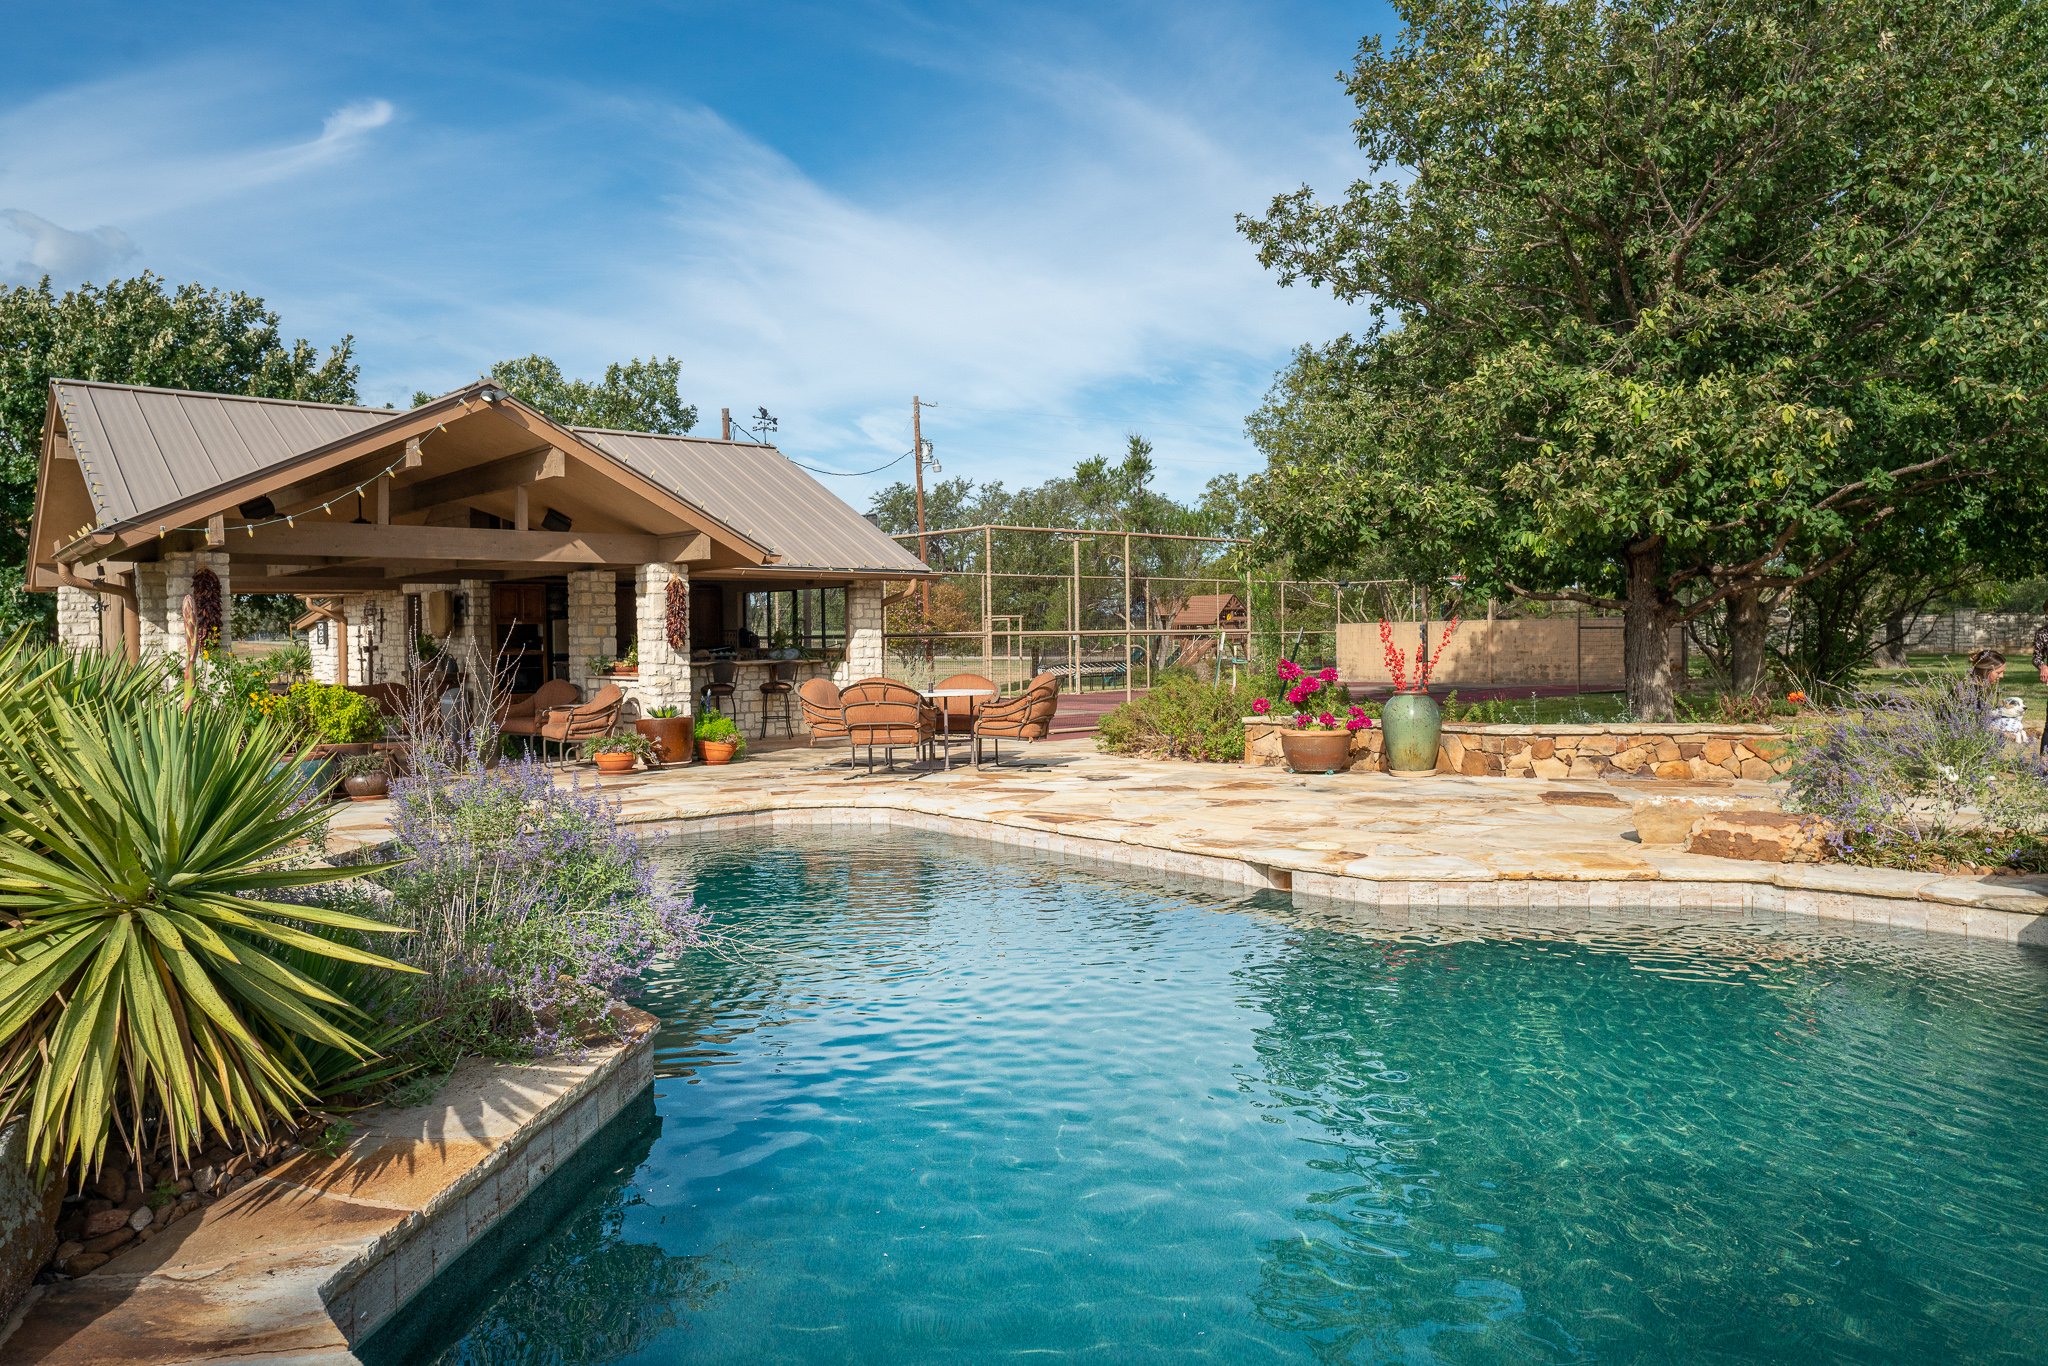 Pool, patio and tennis court on a Texas ranch